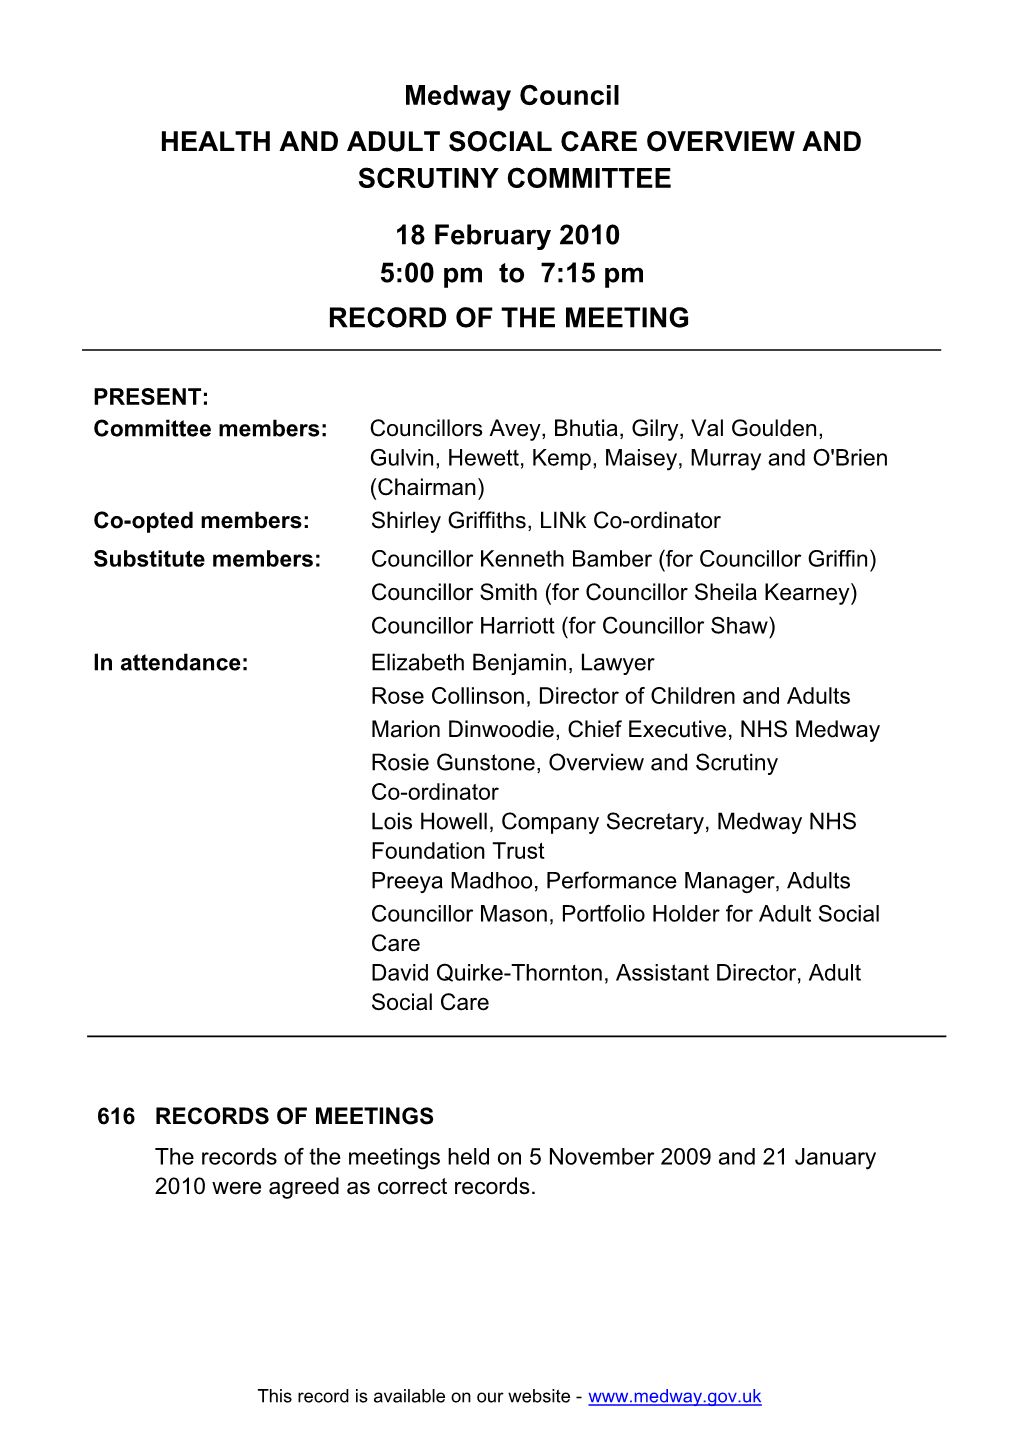 Medway Council HEALTH and ADULT SOCIAL CARE OVERVIEW and SCRUTINY COMMITTEE